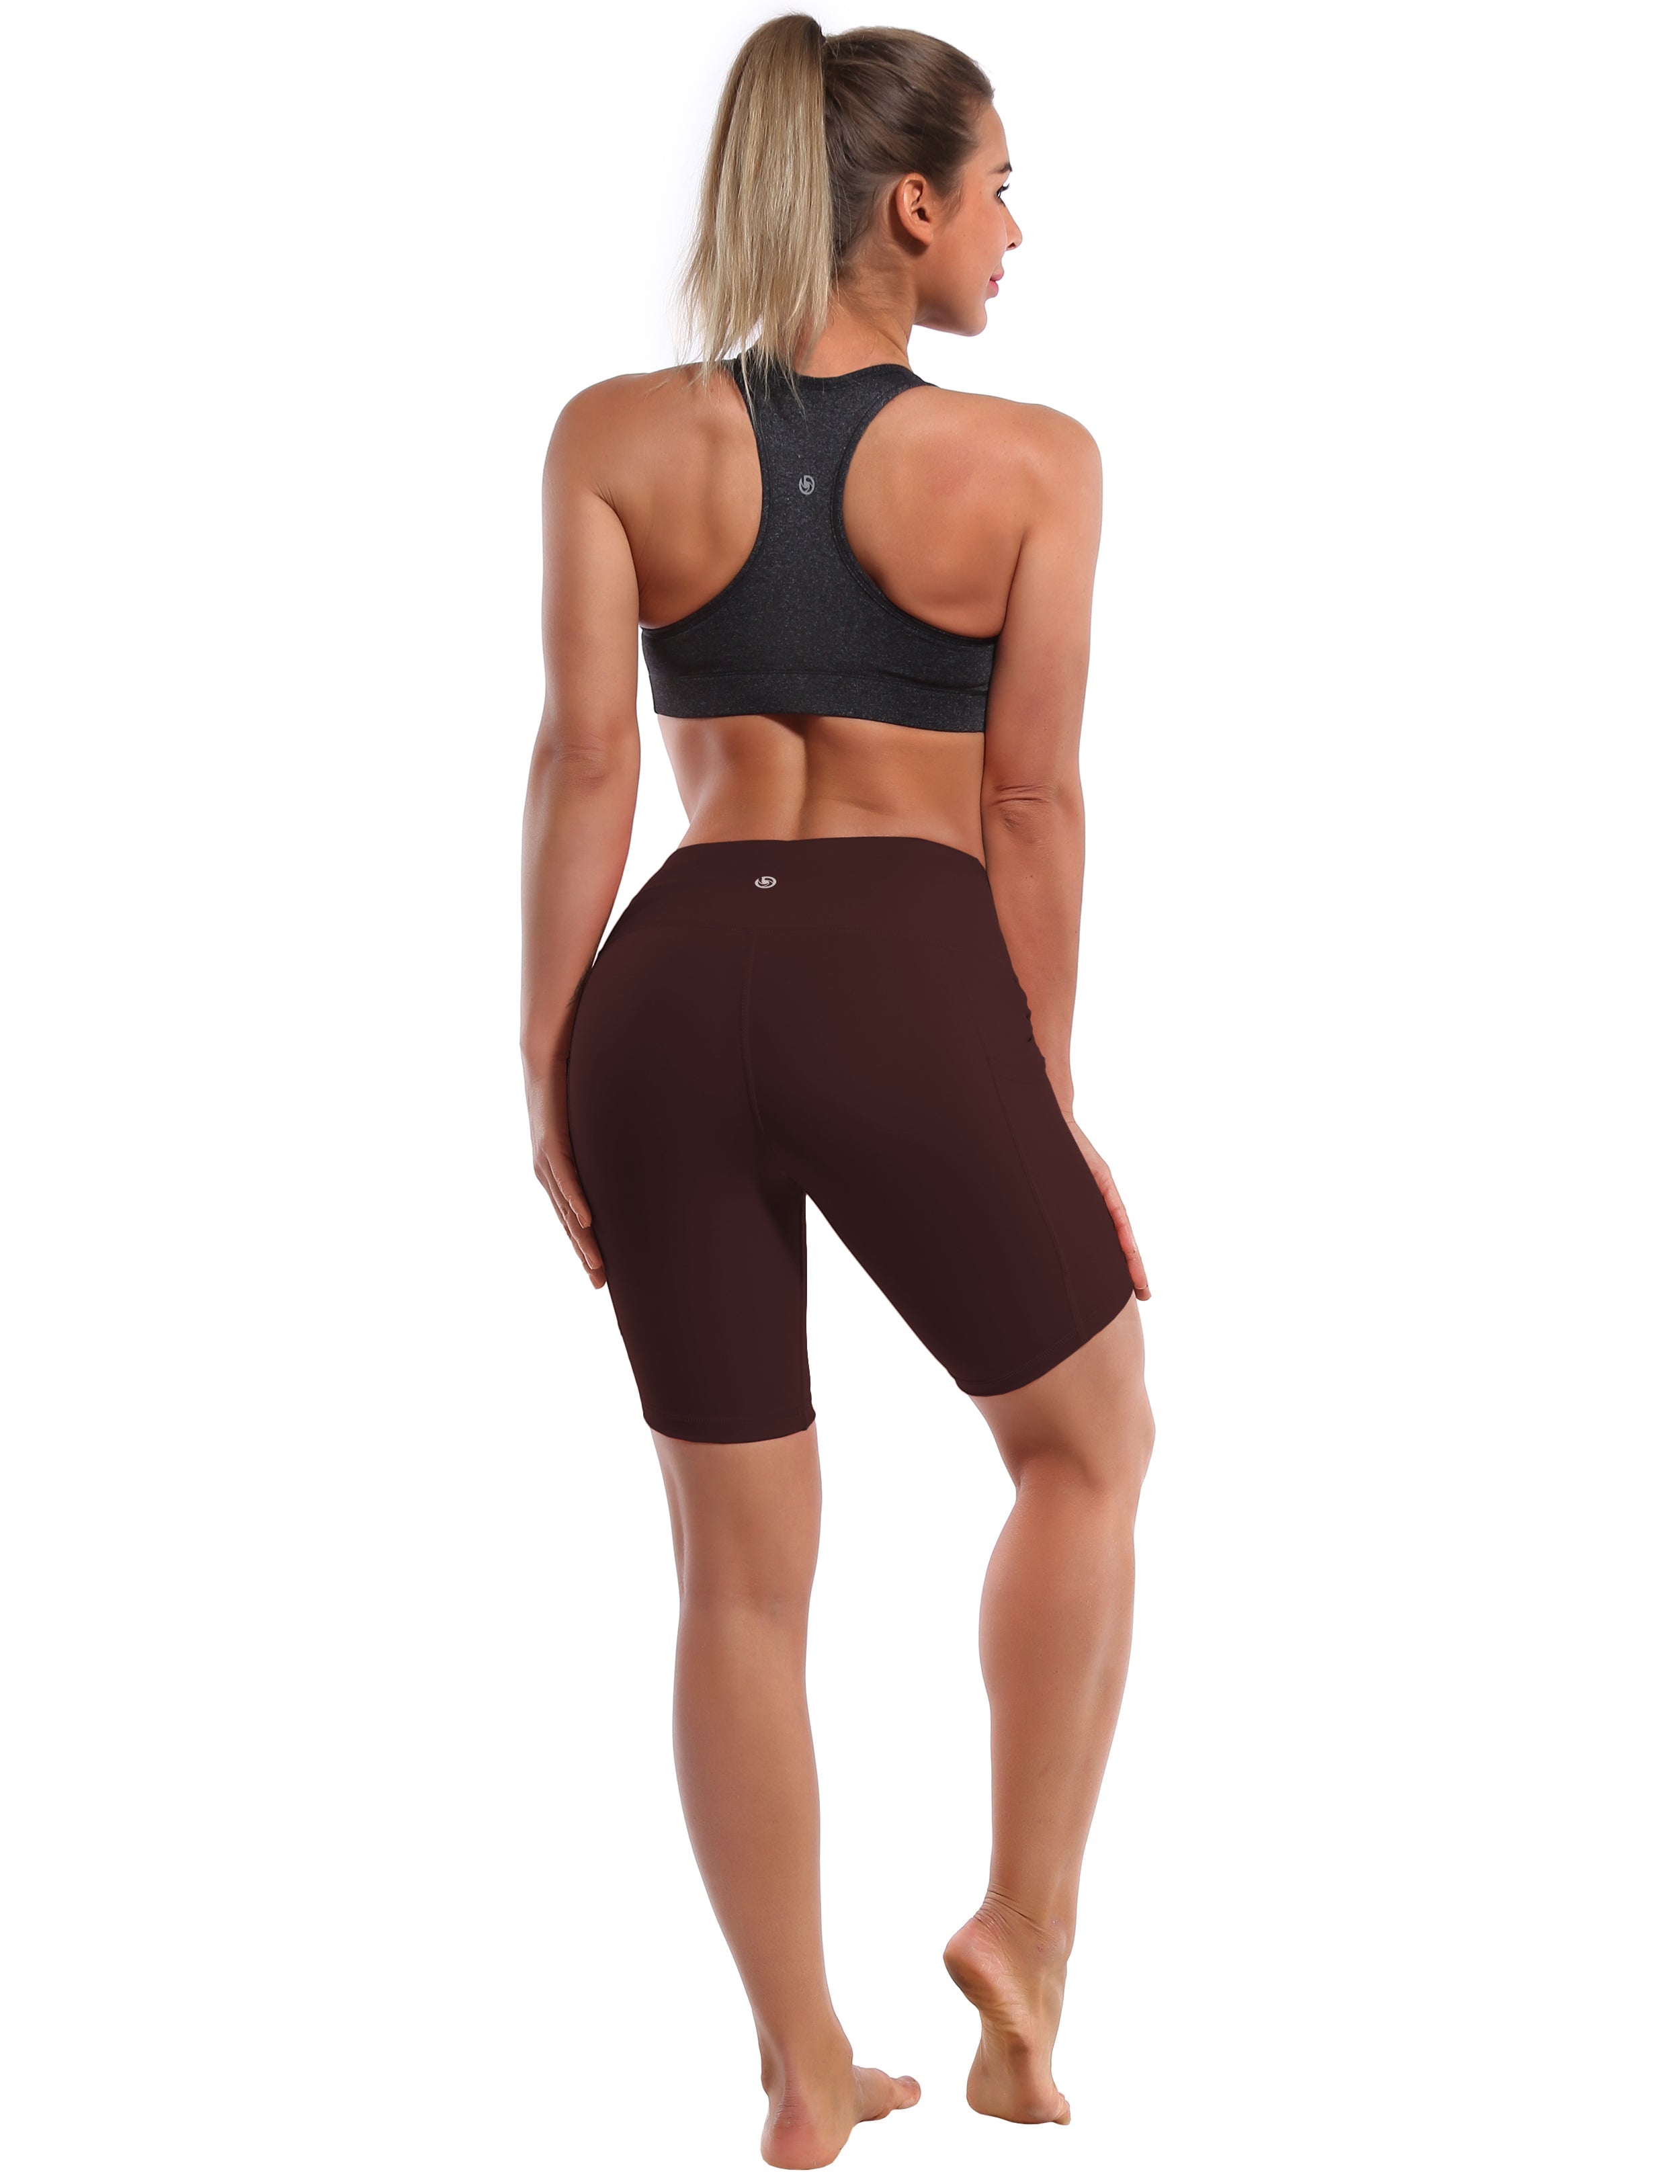 8" Side Pockets Golf Shorts mahoganymaroon Sleek, soft, smooth and totally comfortable: our newest style is here. Softest-ever fabric High elasticity High density 4-way stretch Fabric doesn't attract lint easily No see-through Moisture-wicking Machine wash 75% Nylon, 25% Spandex